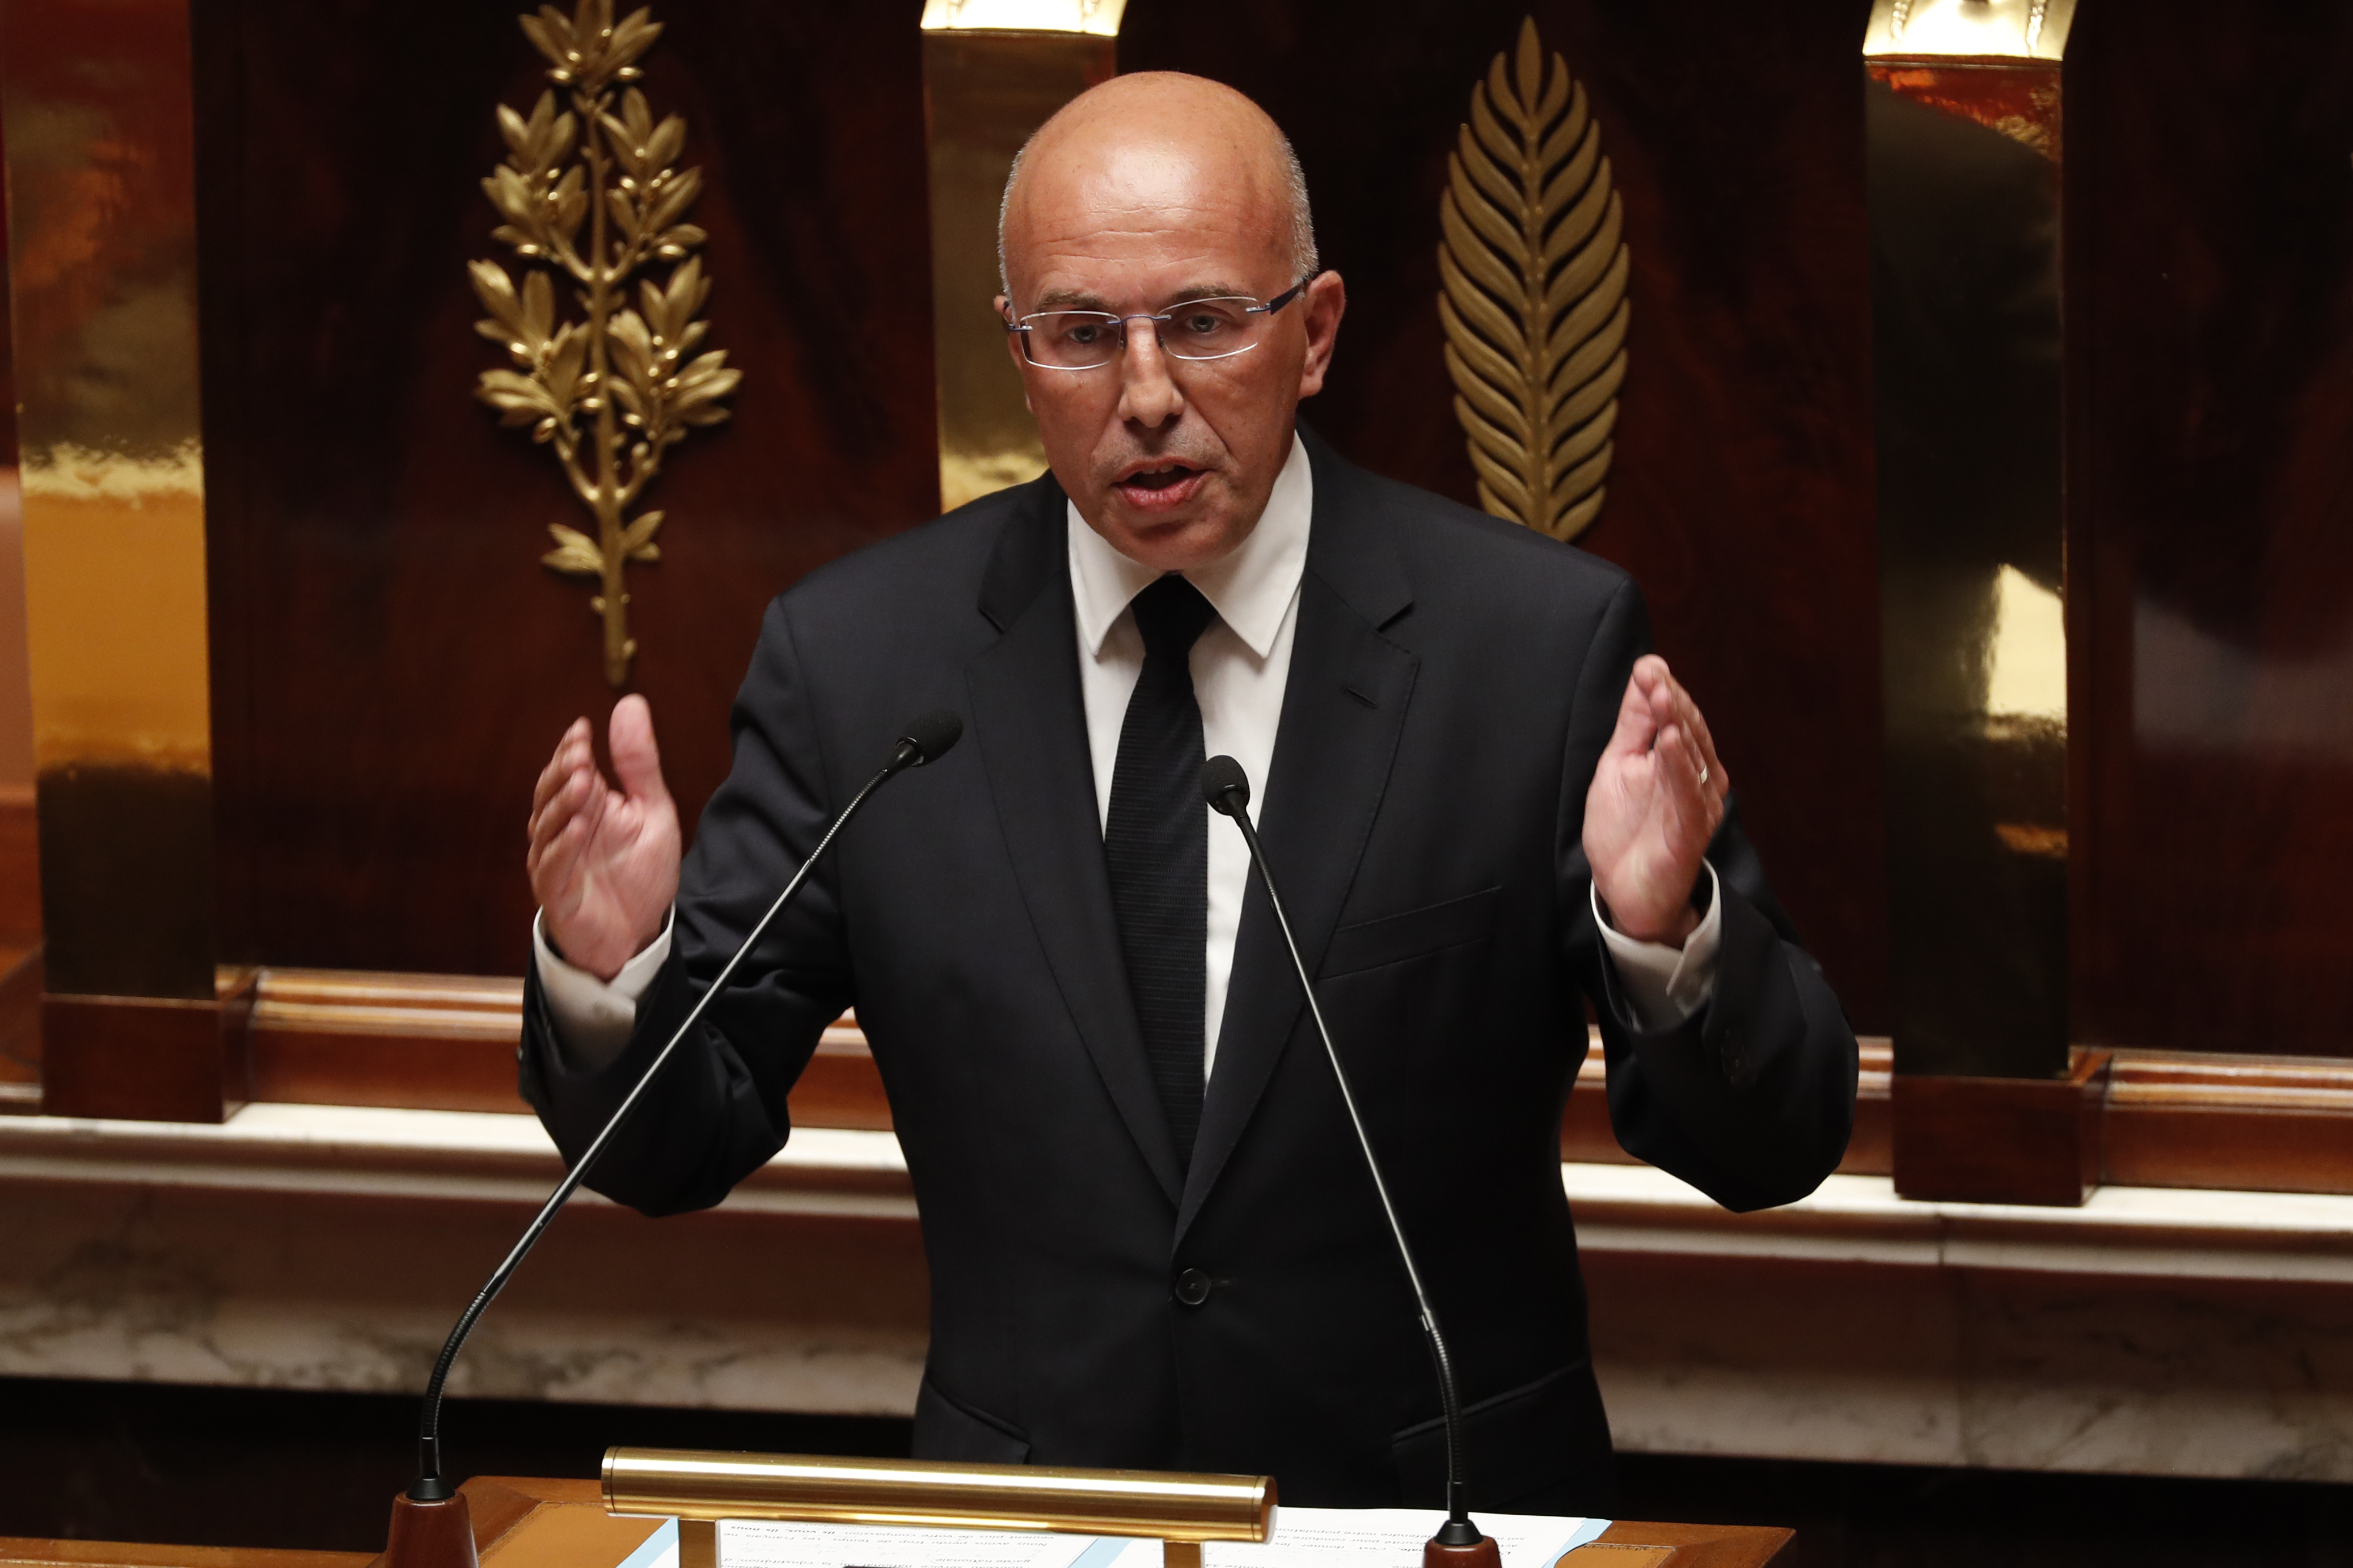 President of the Alpes-Maritimes' departmental council Eric Ciotti speaks during a debate at the National Assembly in Paris on July 19, 2016, regarding the extension of the state of emergency. French lawmakers, prompted by the Bastille Day massacre in Nice, were on July 19 to debate extending the country's state of emergency for a fourth time amid mounting criticism of the government's response to extremist attacks. The state of emergency imposed after the November Paris attacks gives the police sweeping powers to carry out searches and place people under house arrest. / AFP PHOTO / FRANCOIS GUILLOT